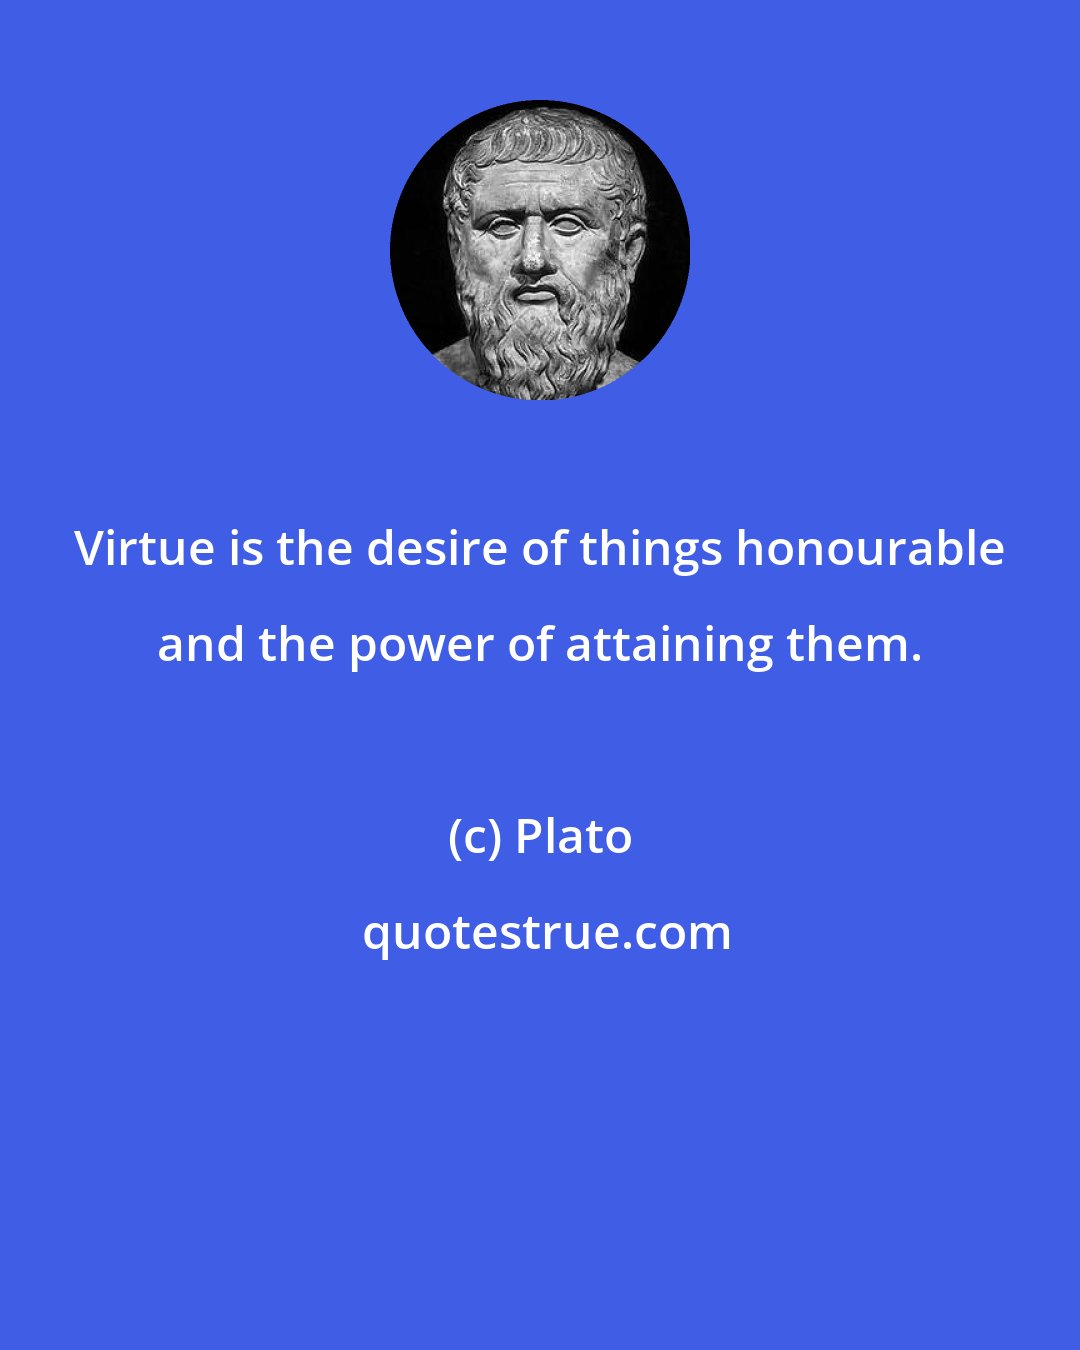 Plato: Virtue is the desire of things honourable and the power of attaining them.